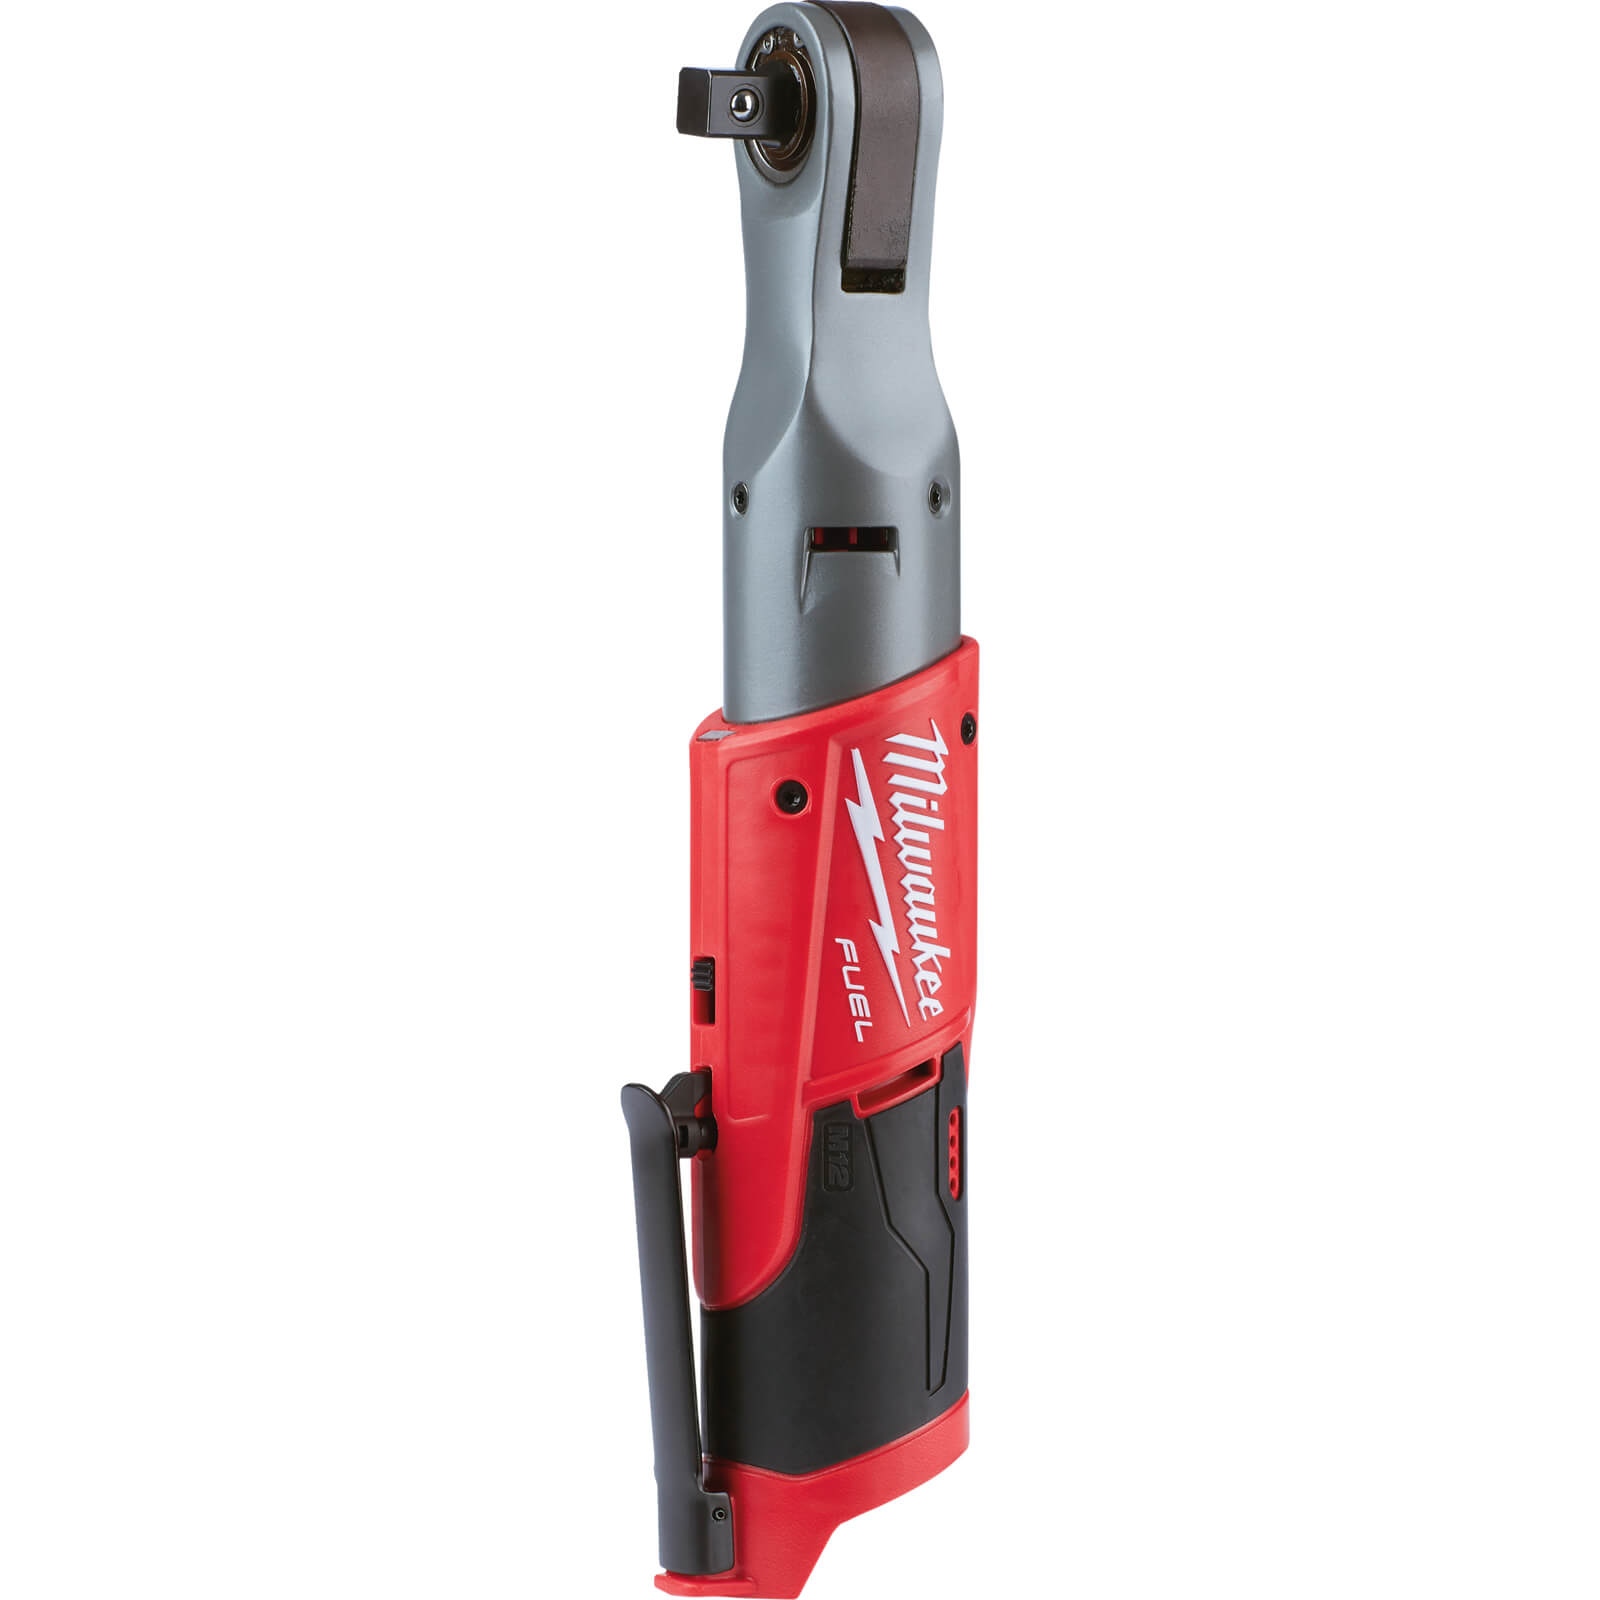 Image of Milwaukee M12 FIR12 Fuel 12v Cordless Brushless 1/2" Drive Ratchet Wrench No Batteries No Charger No Case